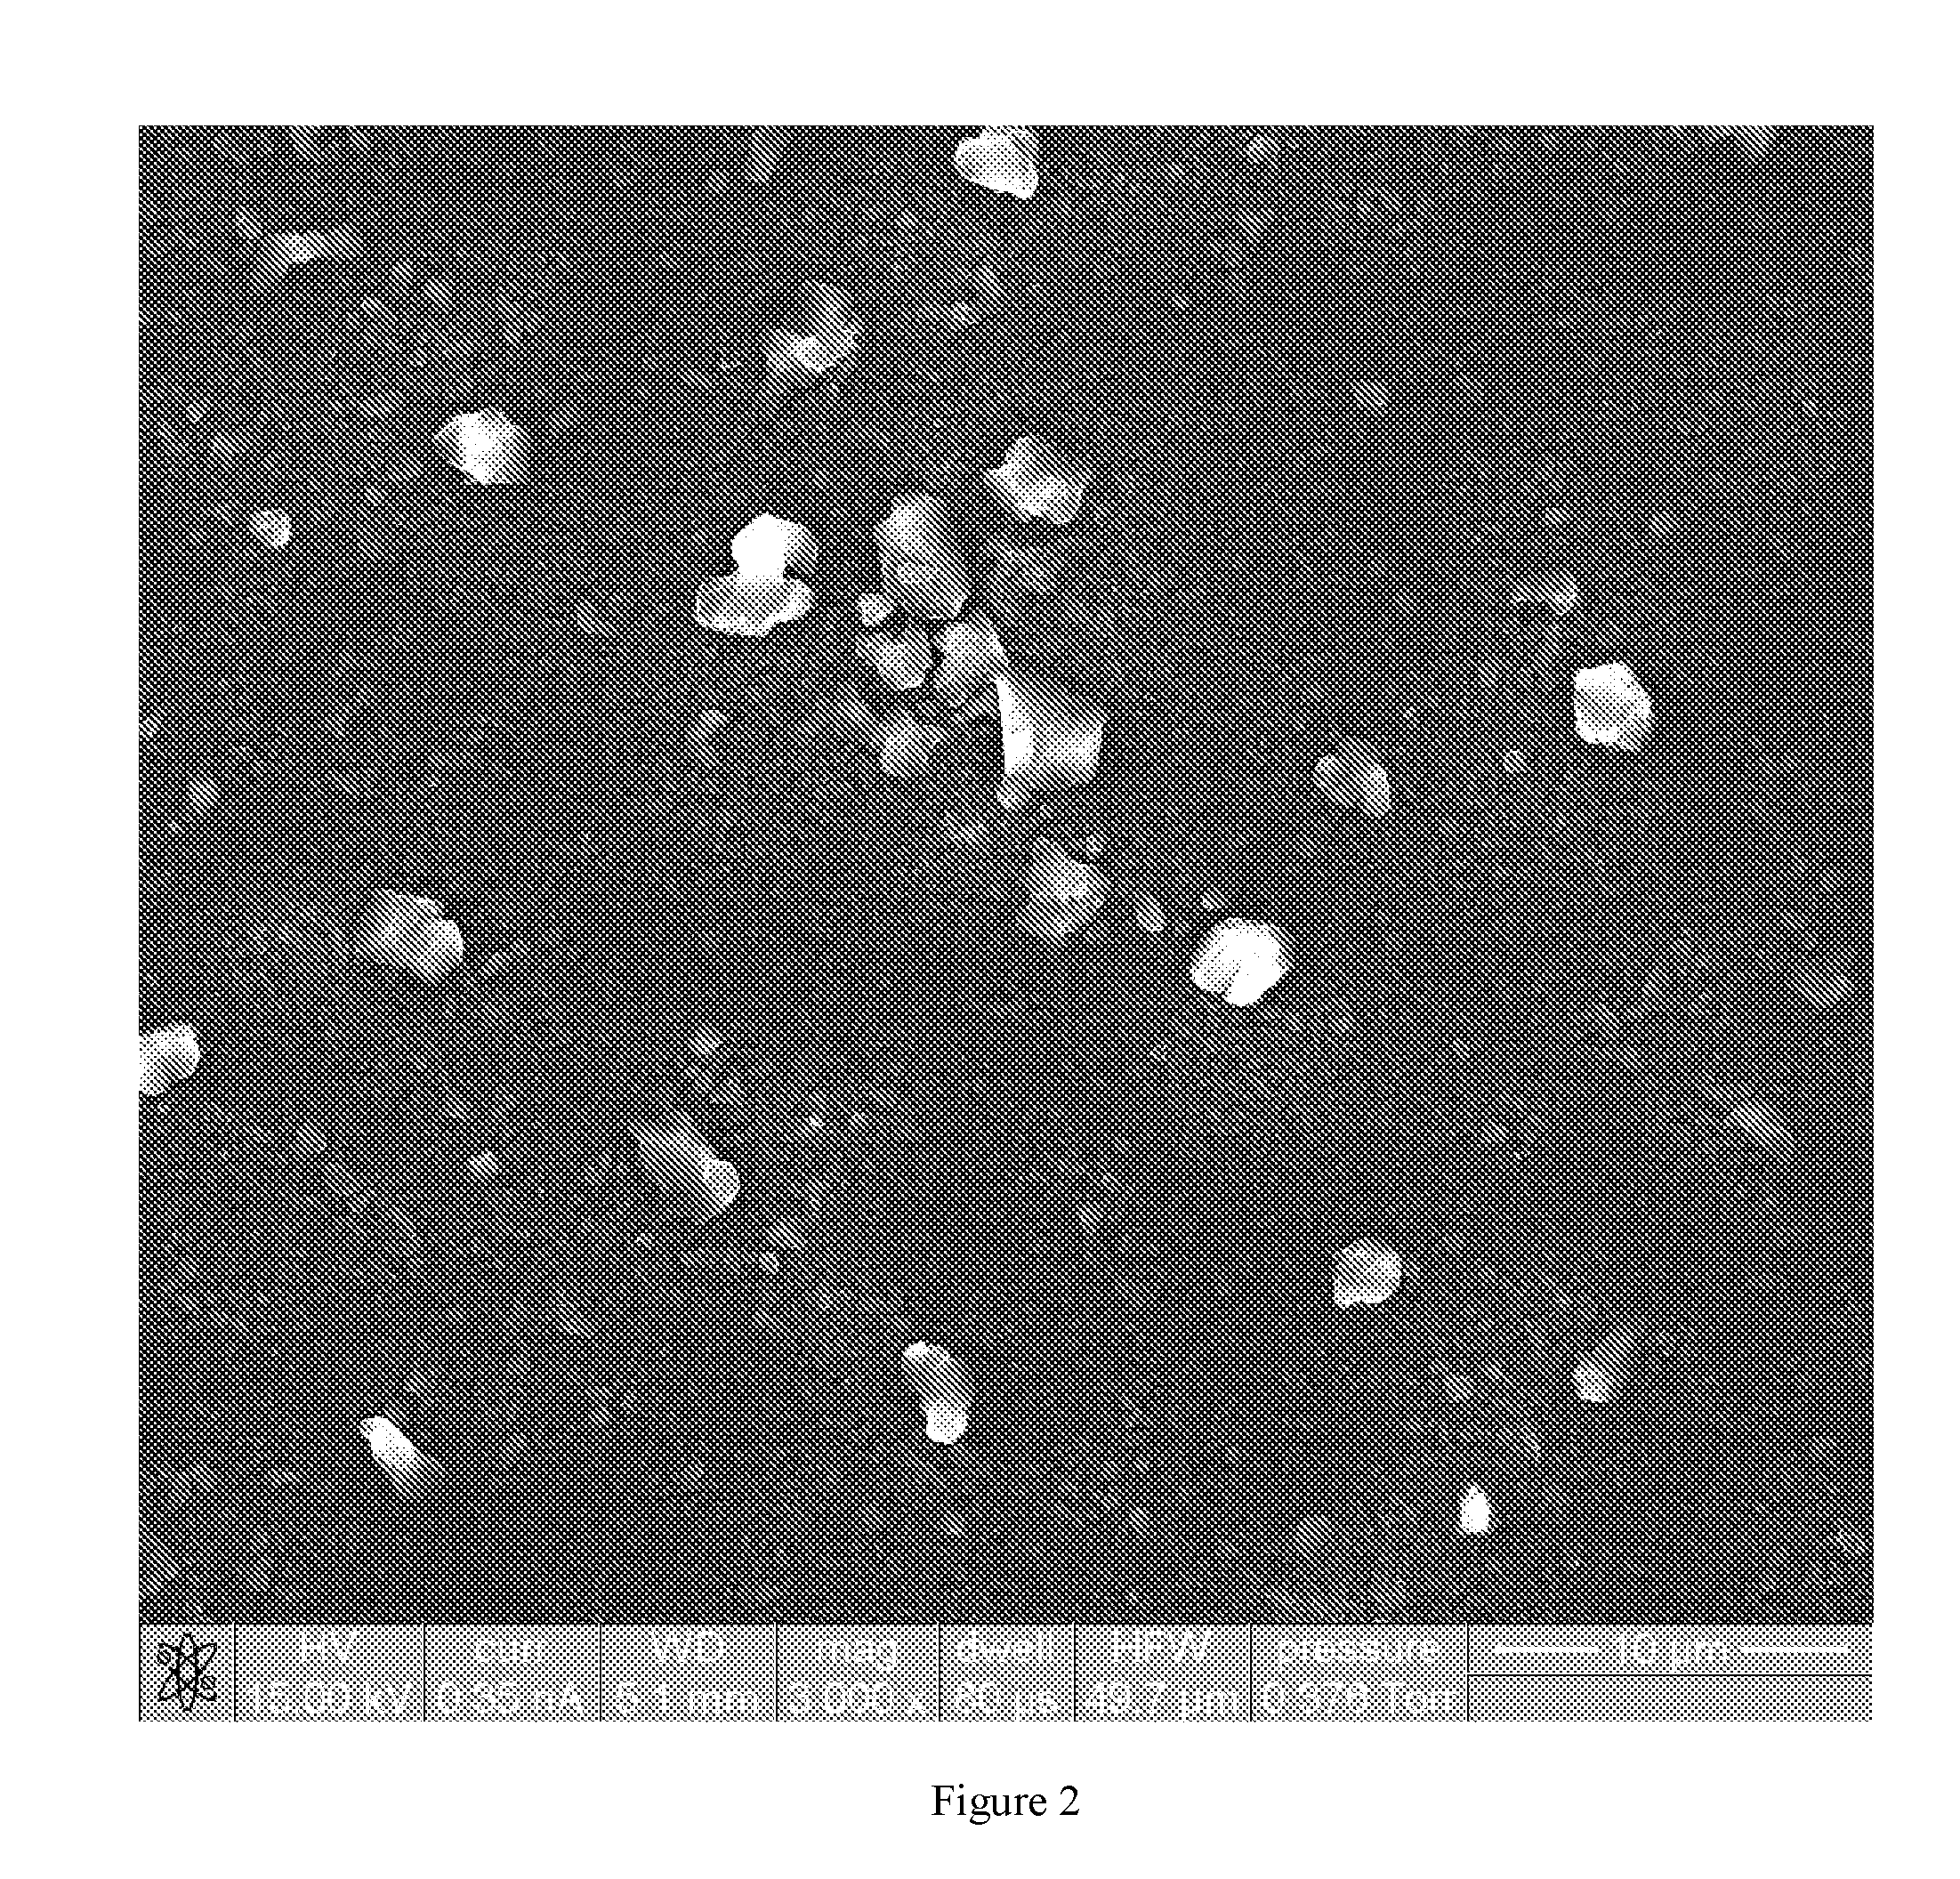 Methods of growing heteroepitaxial single crystal or large grained semiconductor films and devices thereon